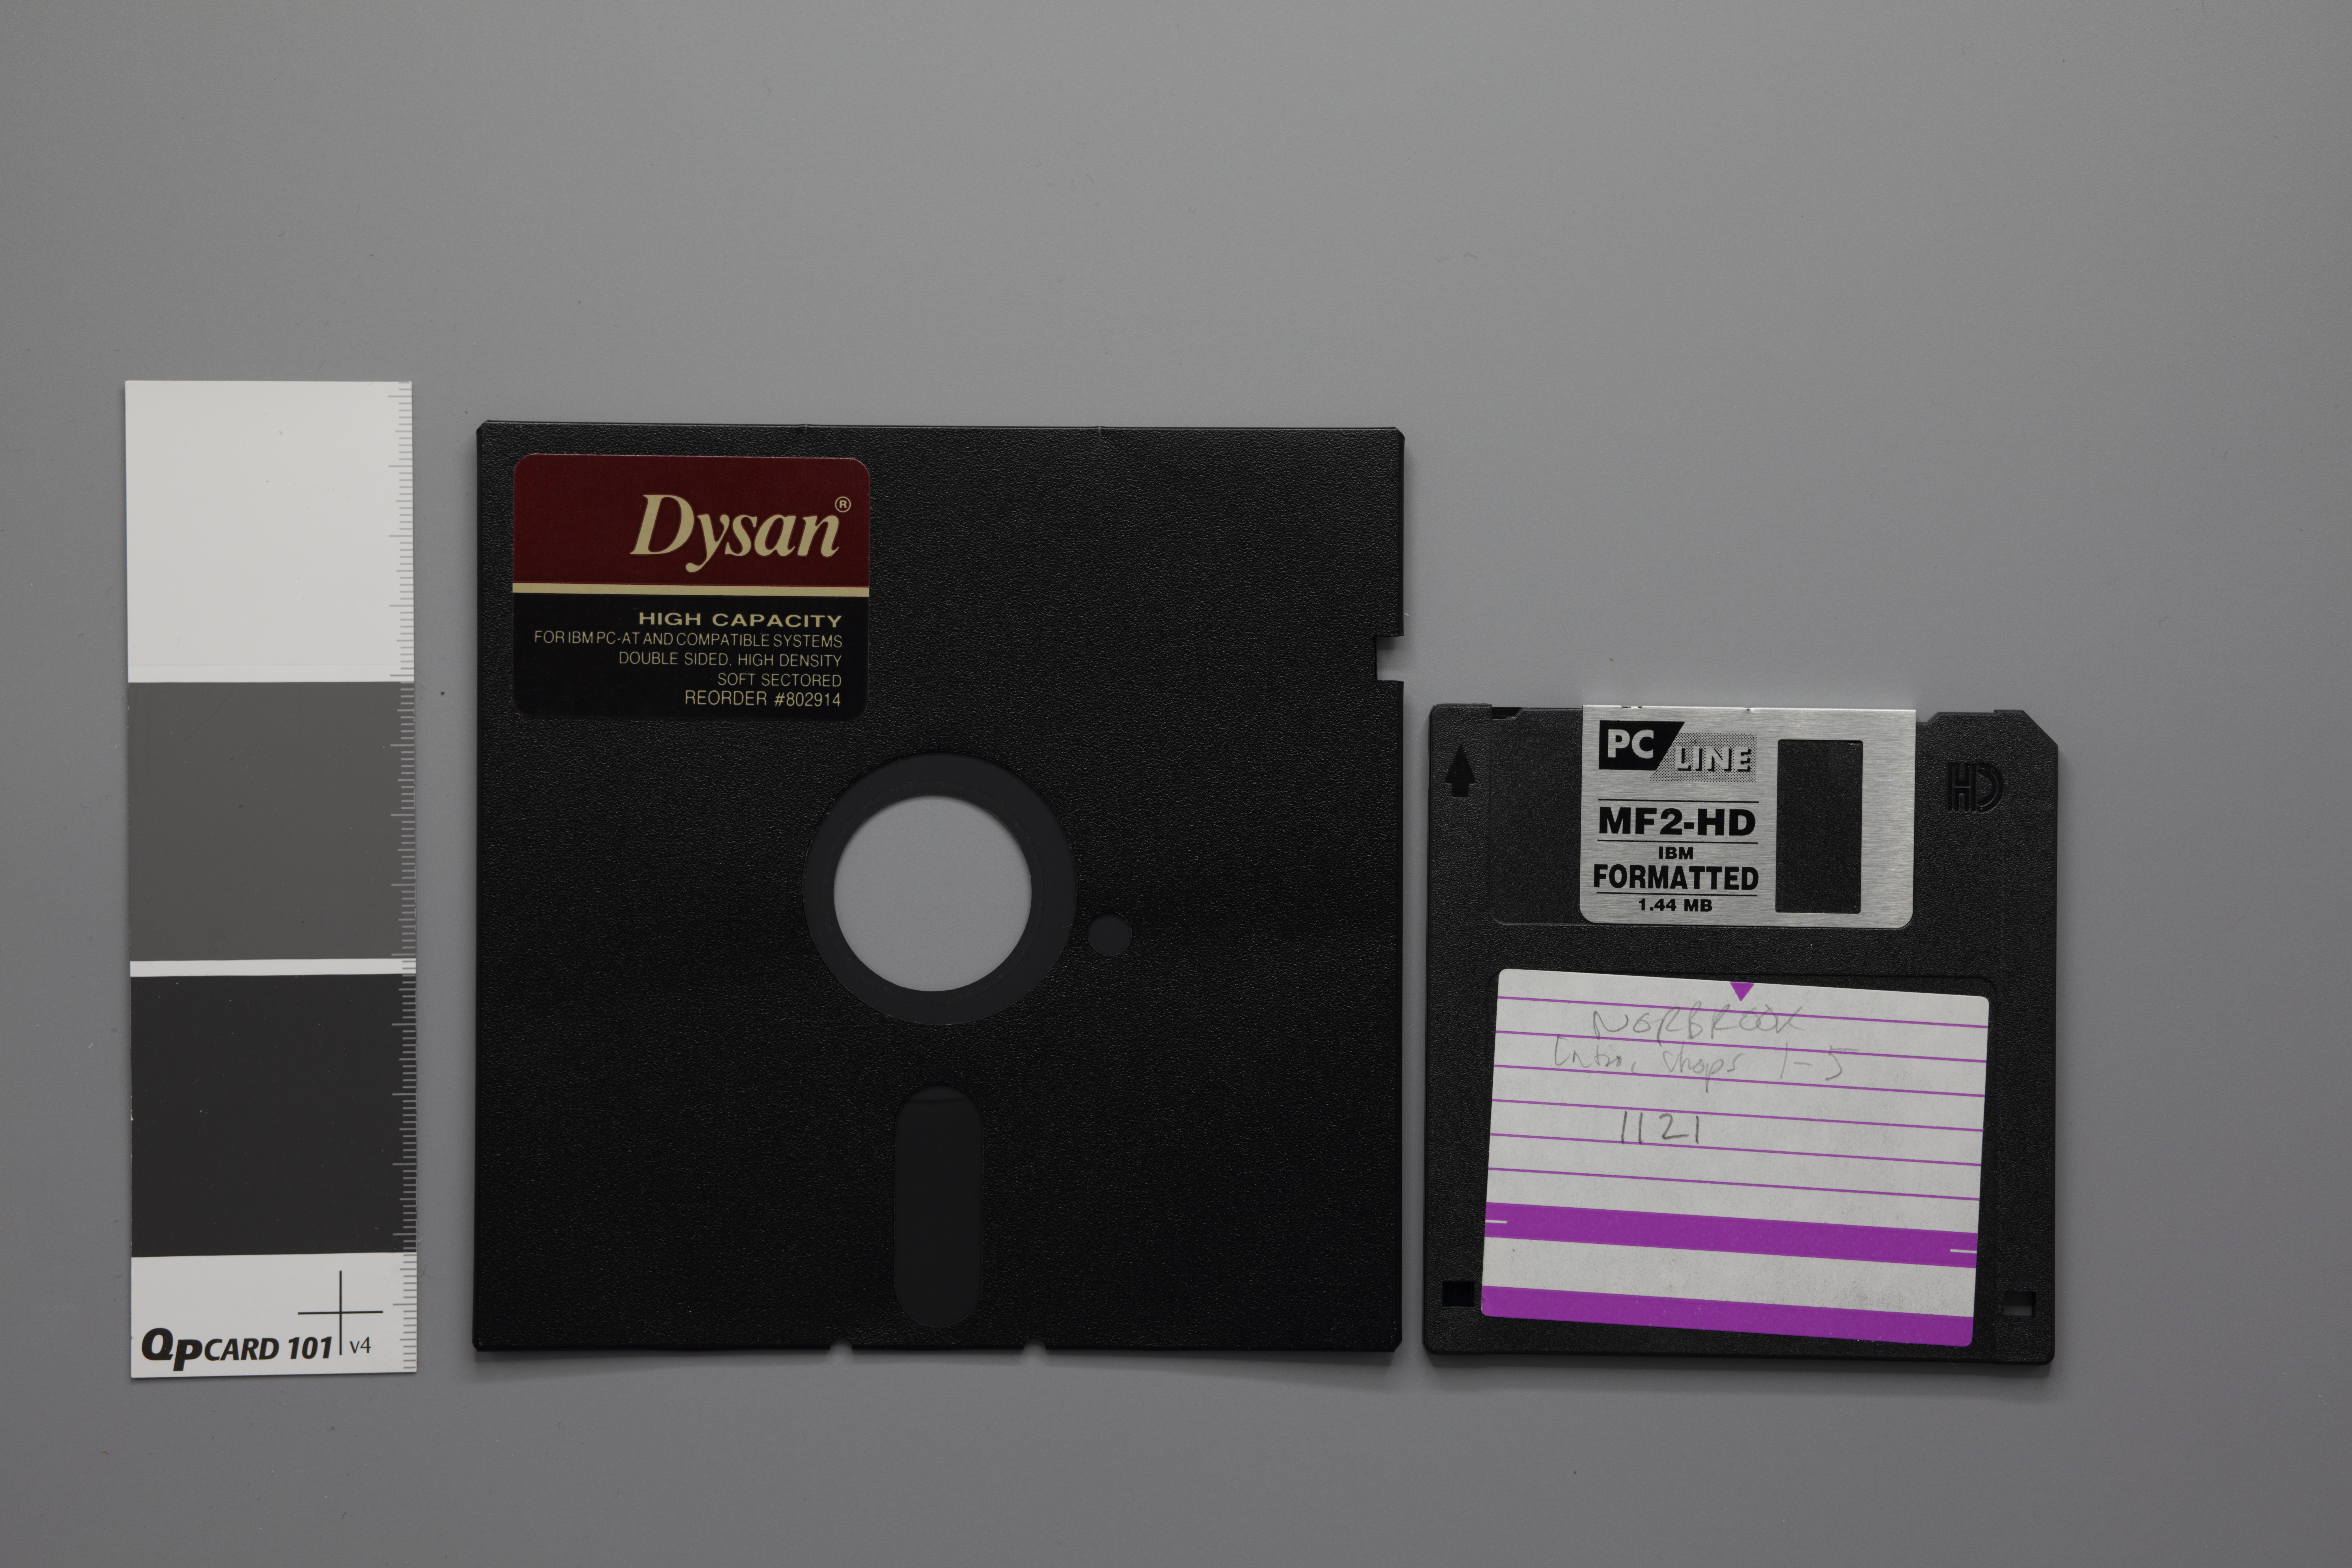 A comparison of two floppy disk, on the left a 5.25-inch disk, on the right a 3.5-inch disk